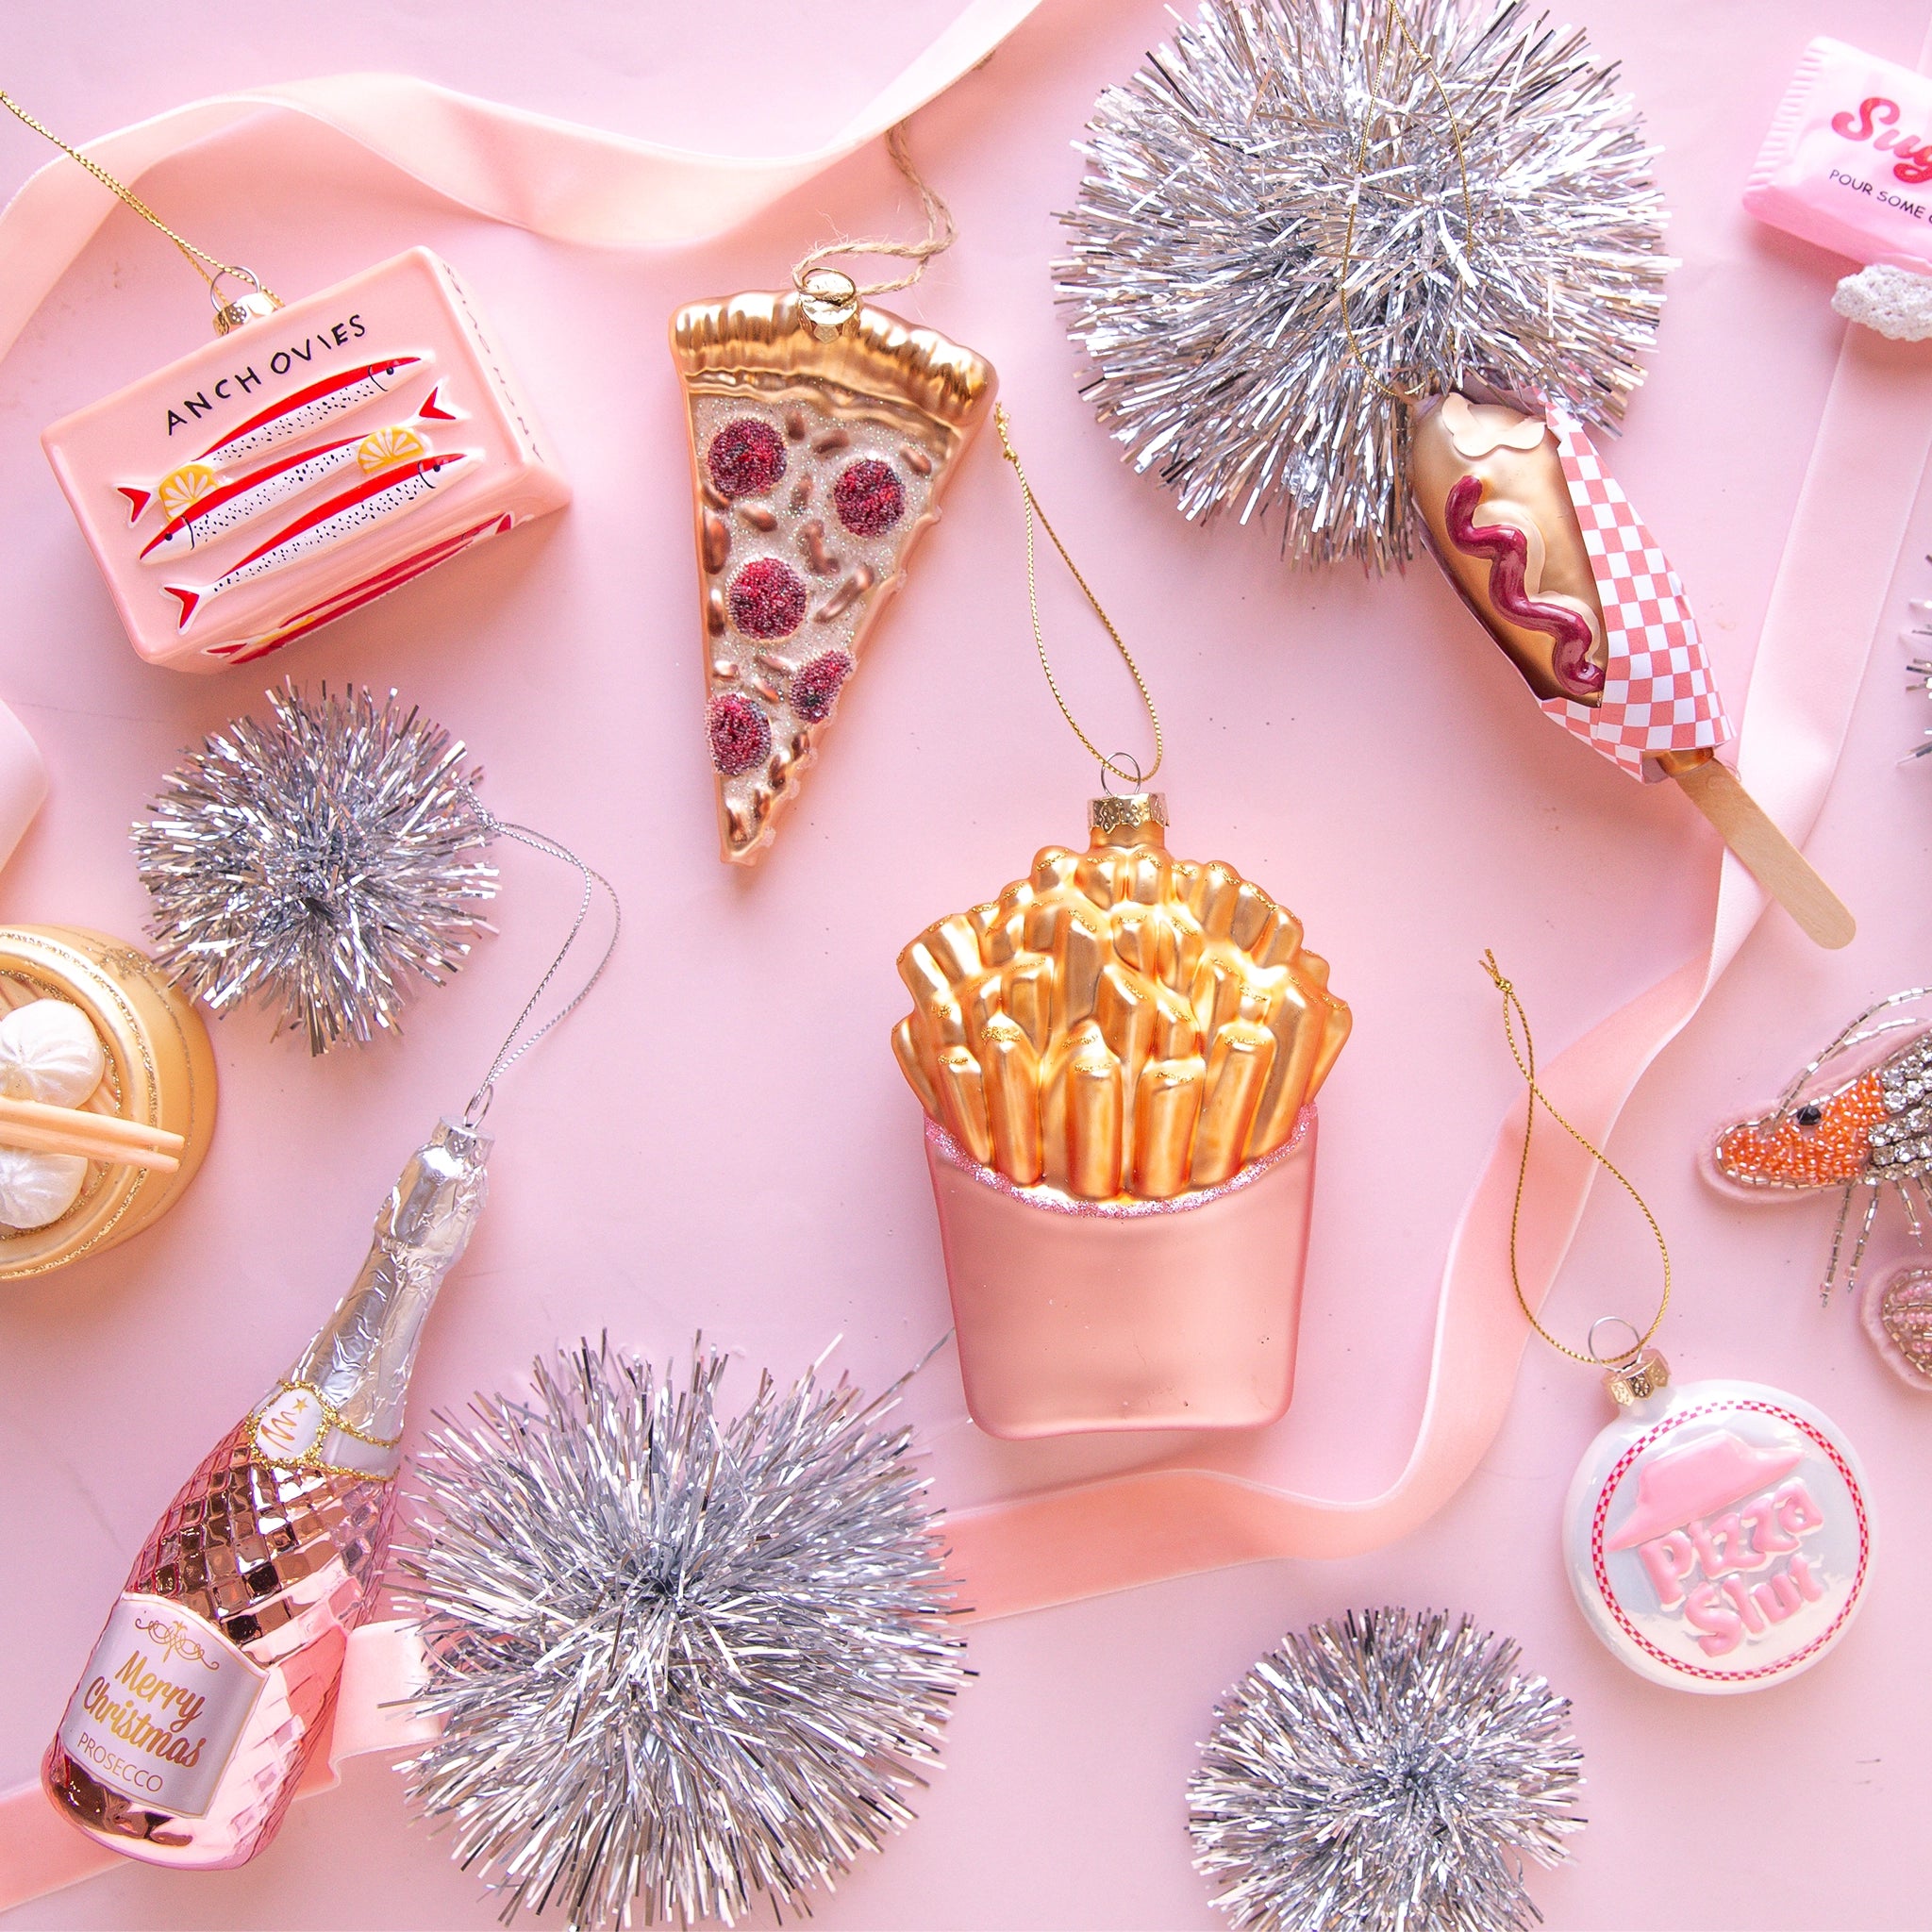 On a pink background is an assortment of glass ornaments in the shape of foods and staged next to pink ribbon and silver tinsel pom poms.